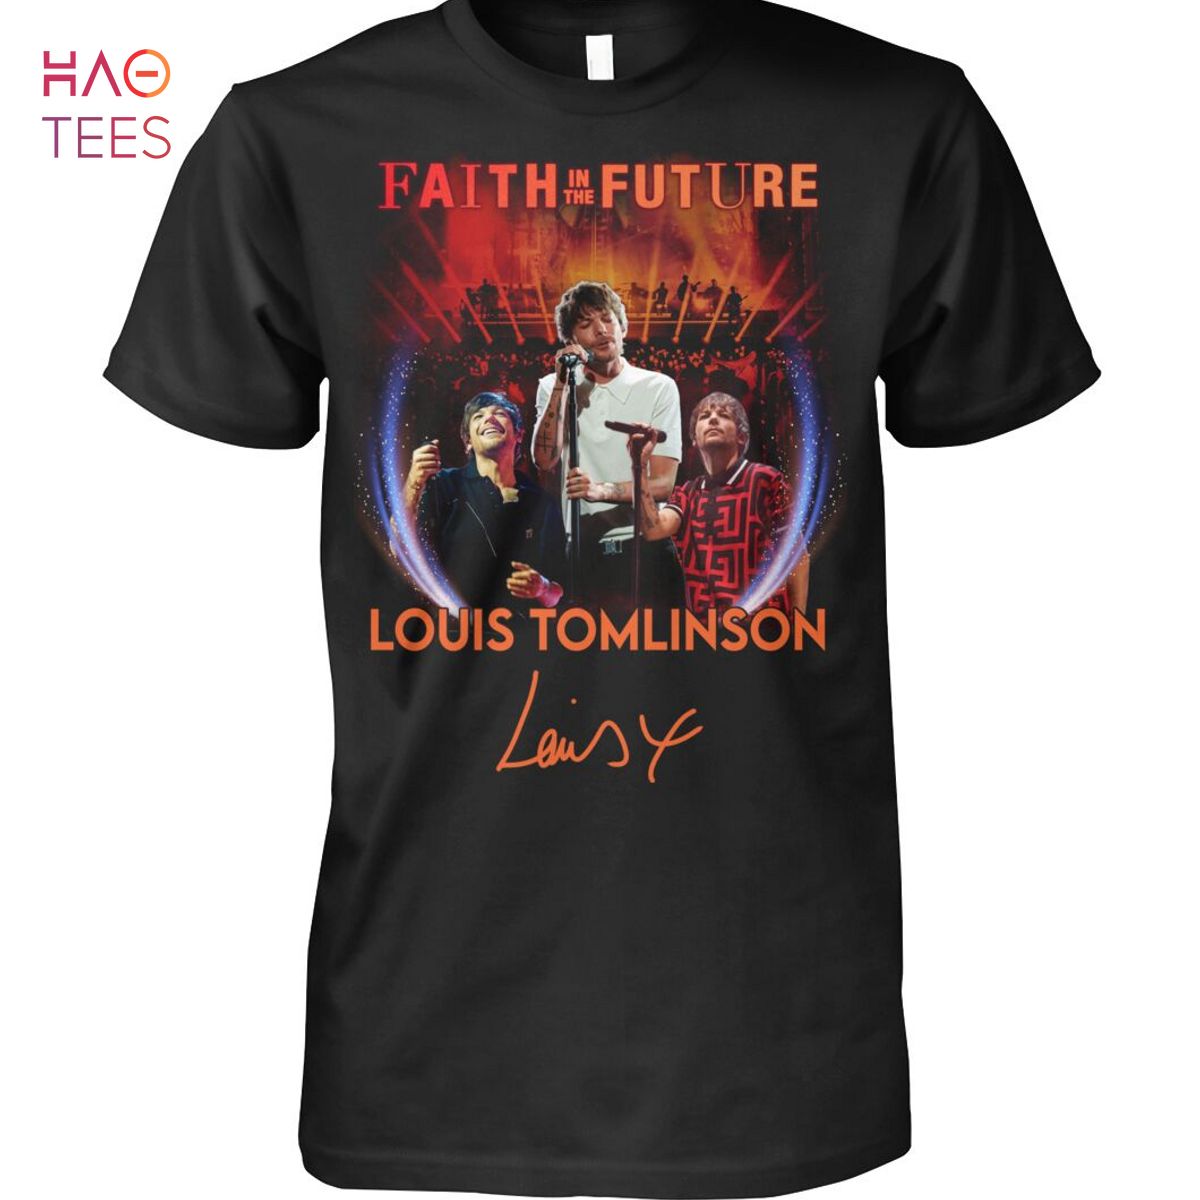 Louis Tomlinson Shirt Limited Edition